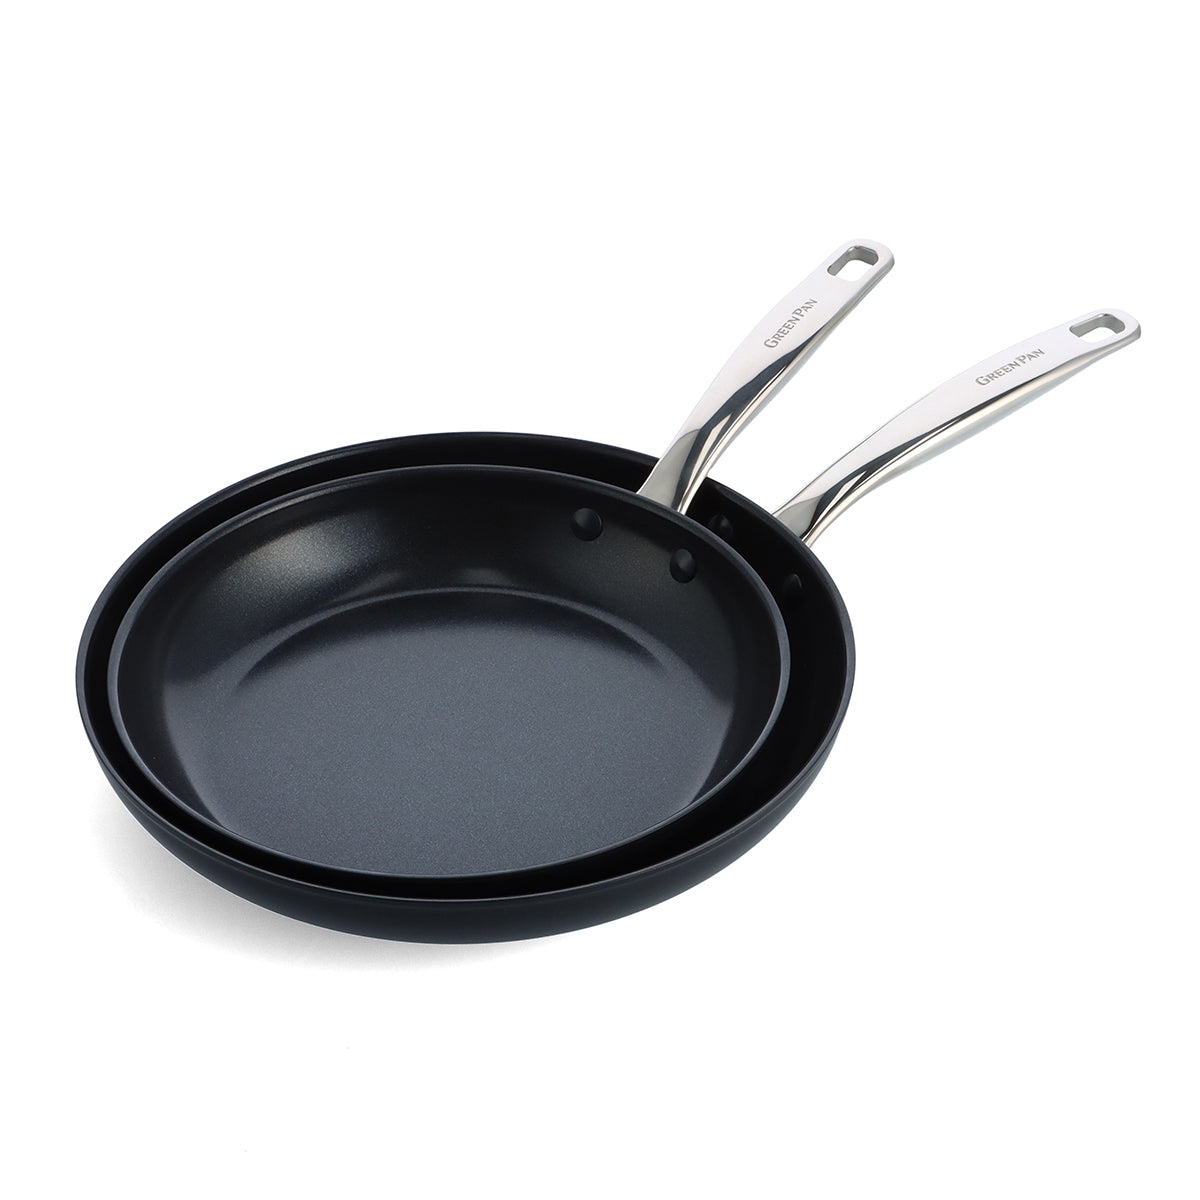 GreenPan Chatham 12 in. Stainless Steel Ceramic Nonstick Frying